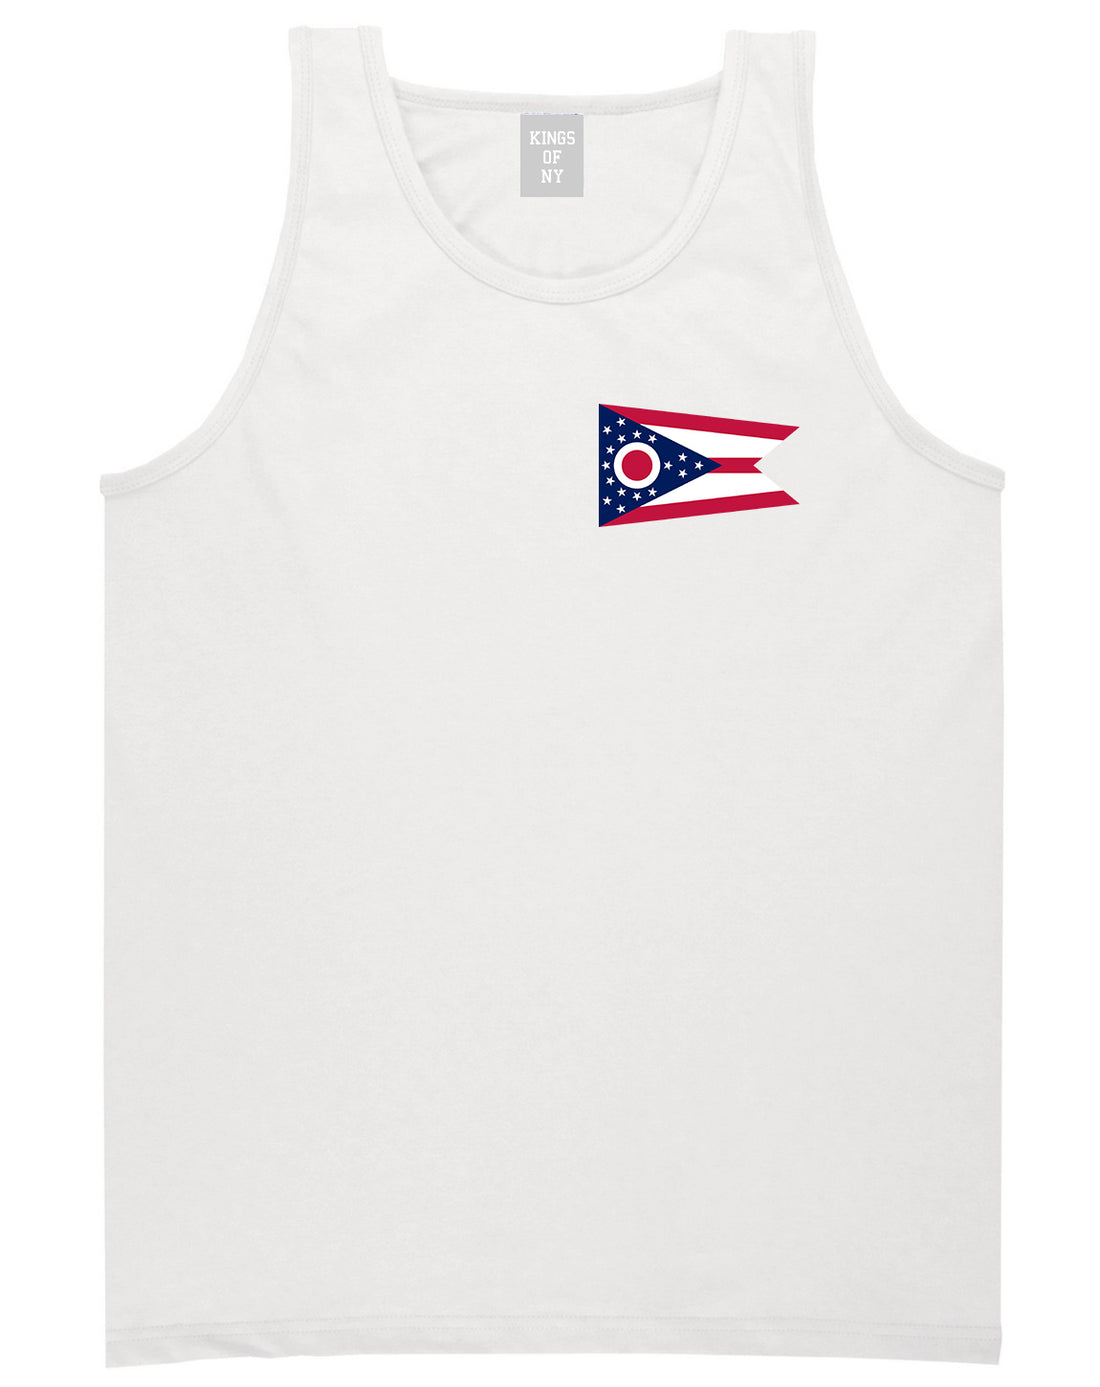 Ohio State Flag OH Chest Mens Tank Top T-Shirt White